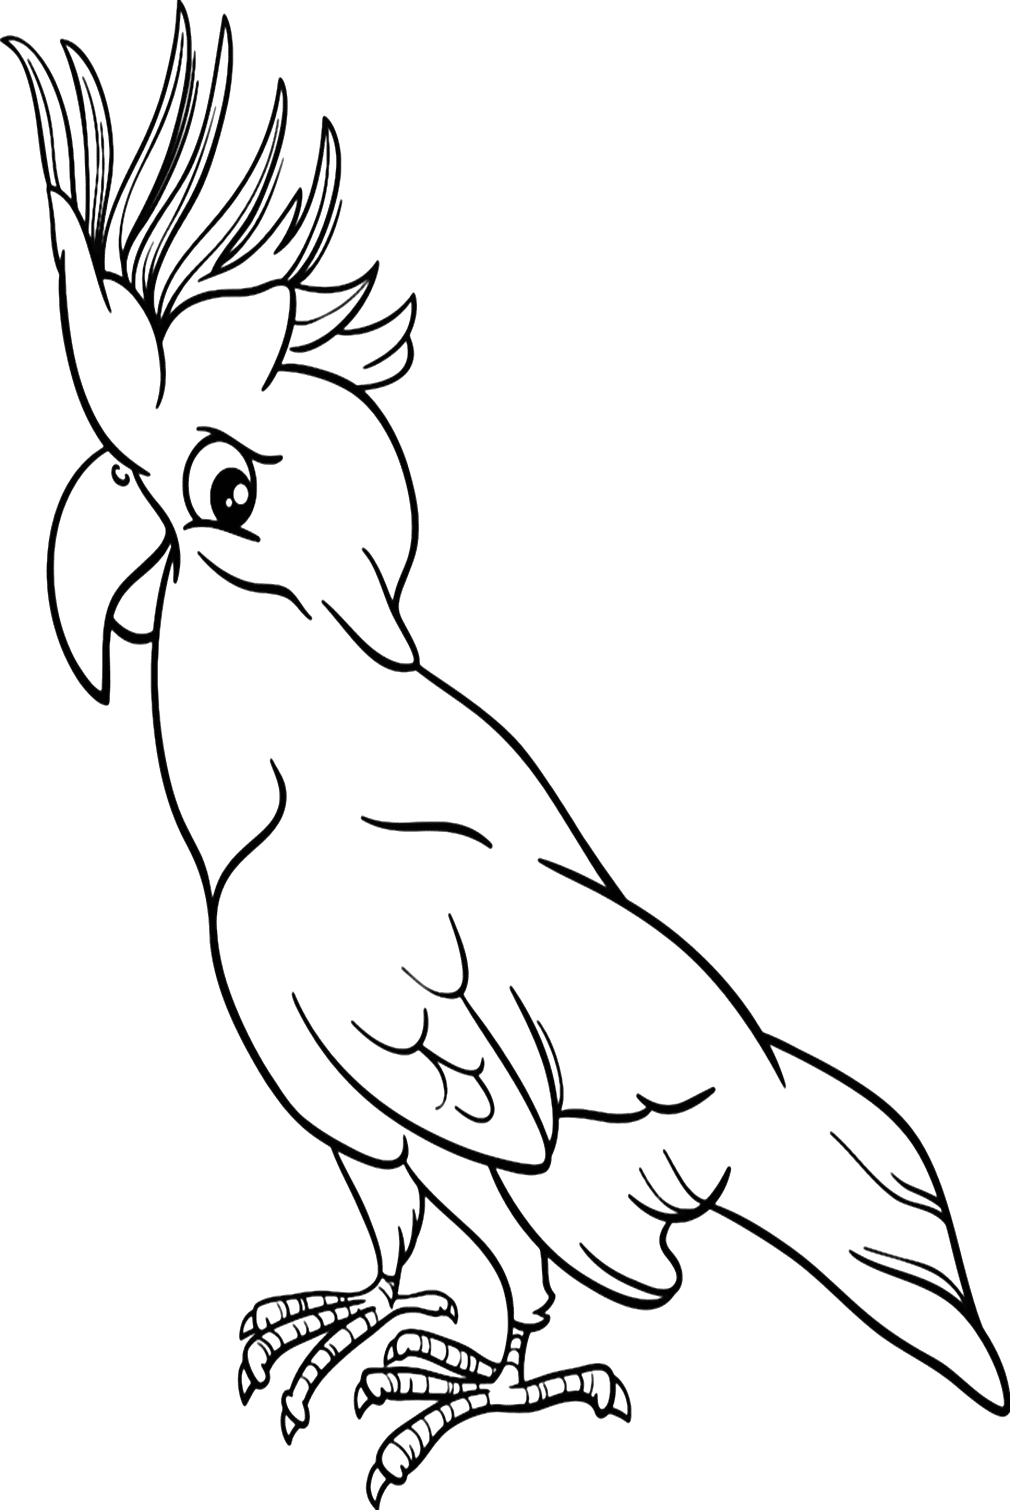 Cockatiel Picture To Color - Free Printable Coloring Pages